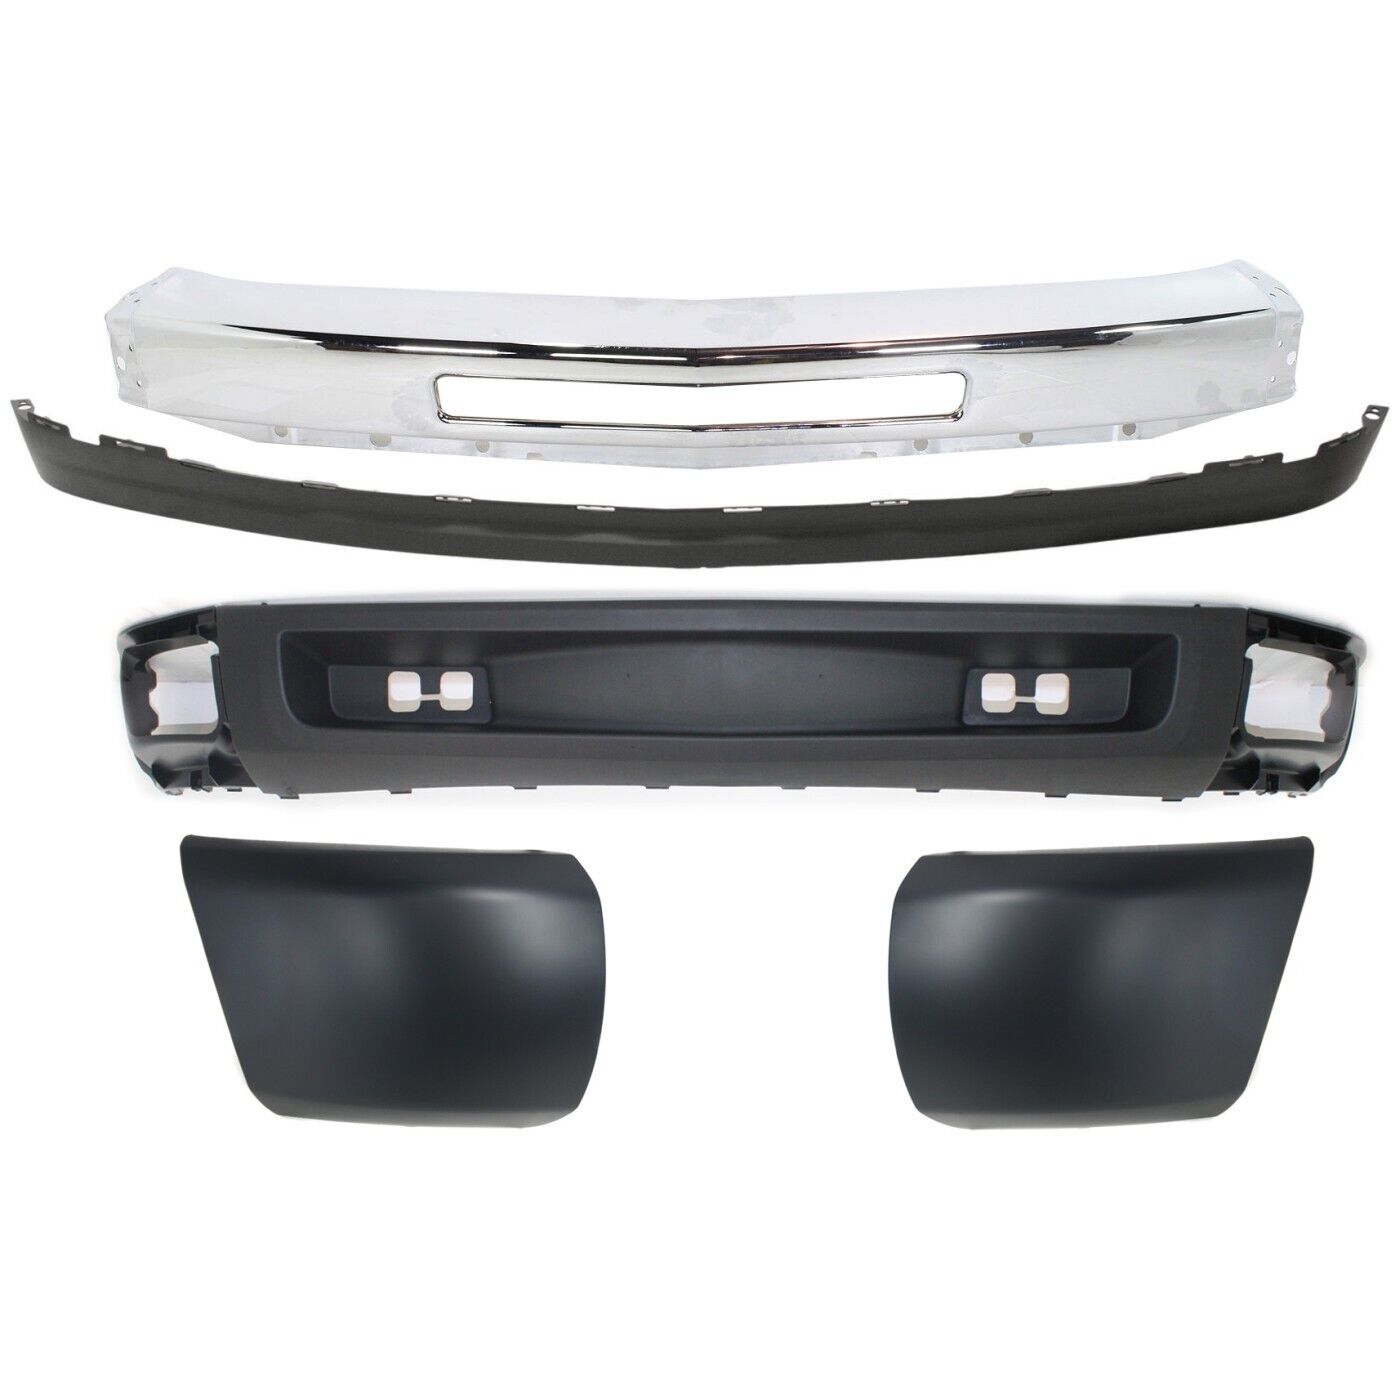 Front Bumper Kit For 2009-2013 Silverado 1500 - Bumper Ends and Valance